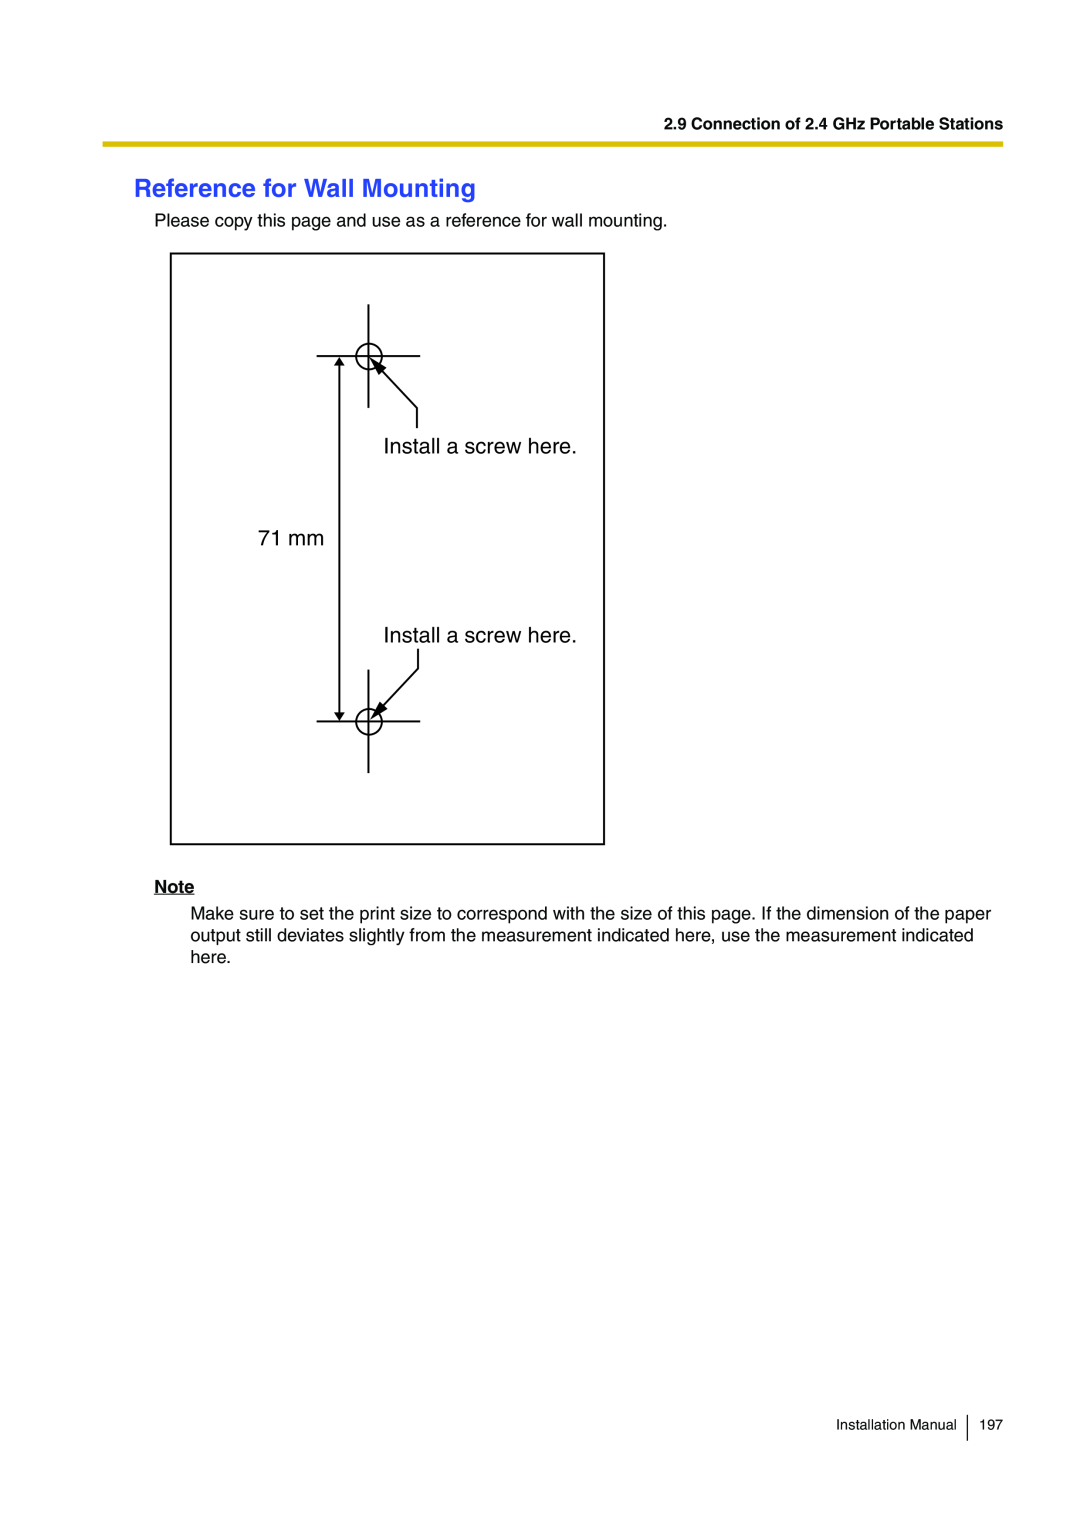 Panasonic KX-TDA100 installation manual Reference for Wall Mounting, Install a screw here 71 mm Install a screw here 